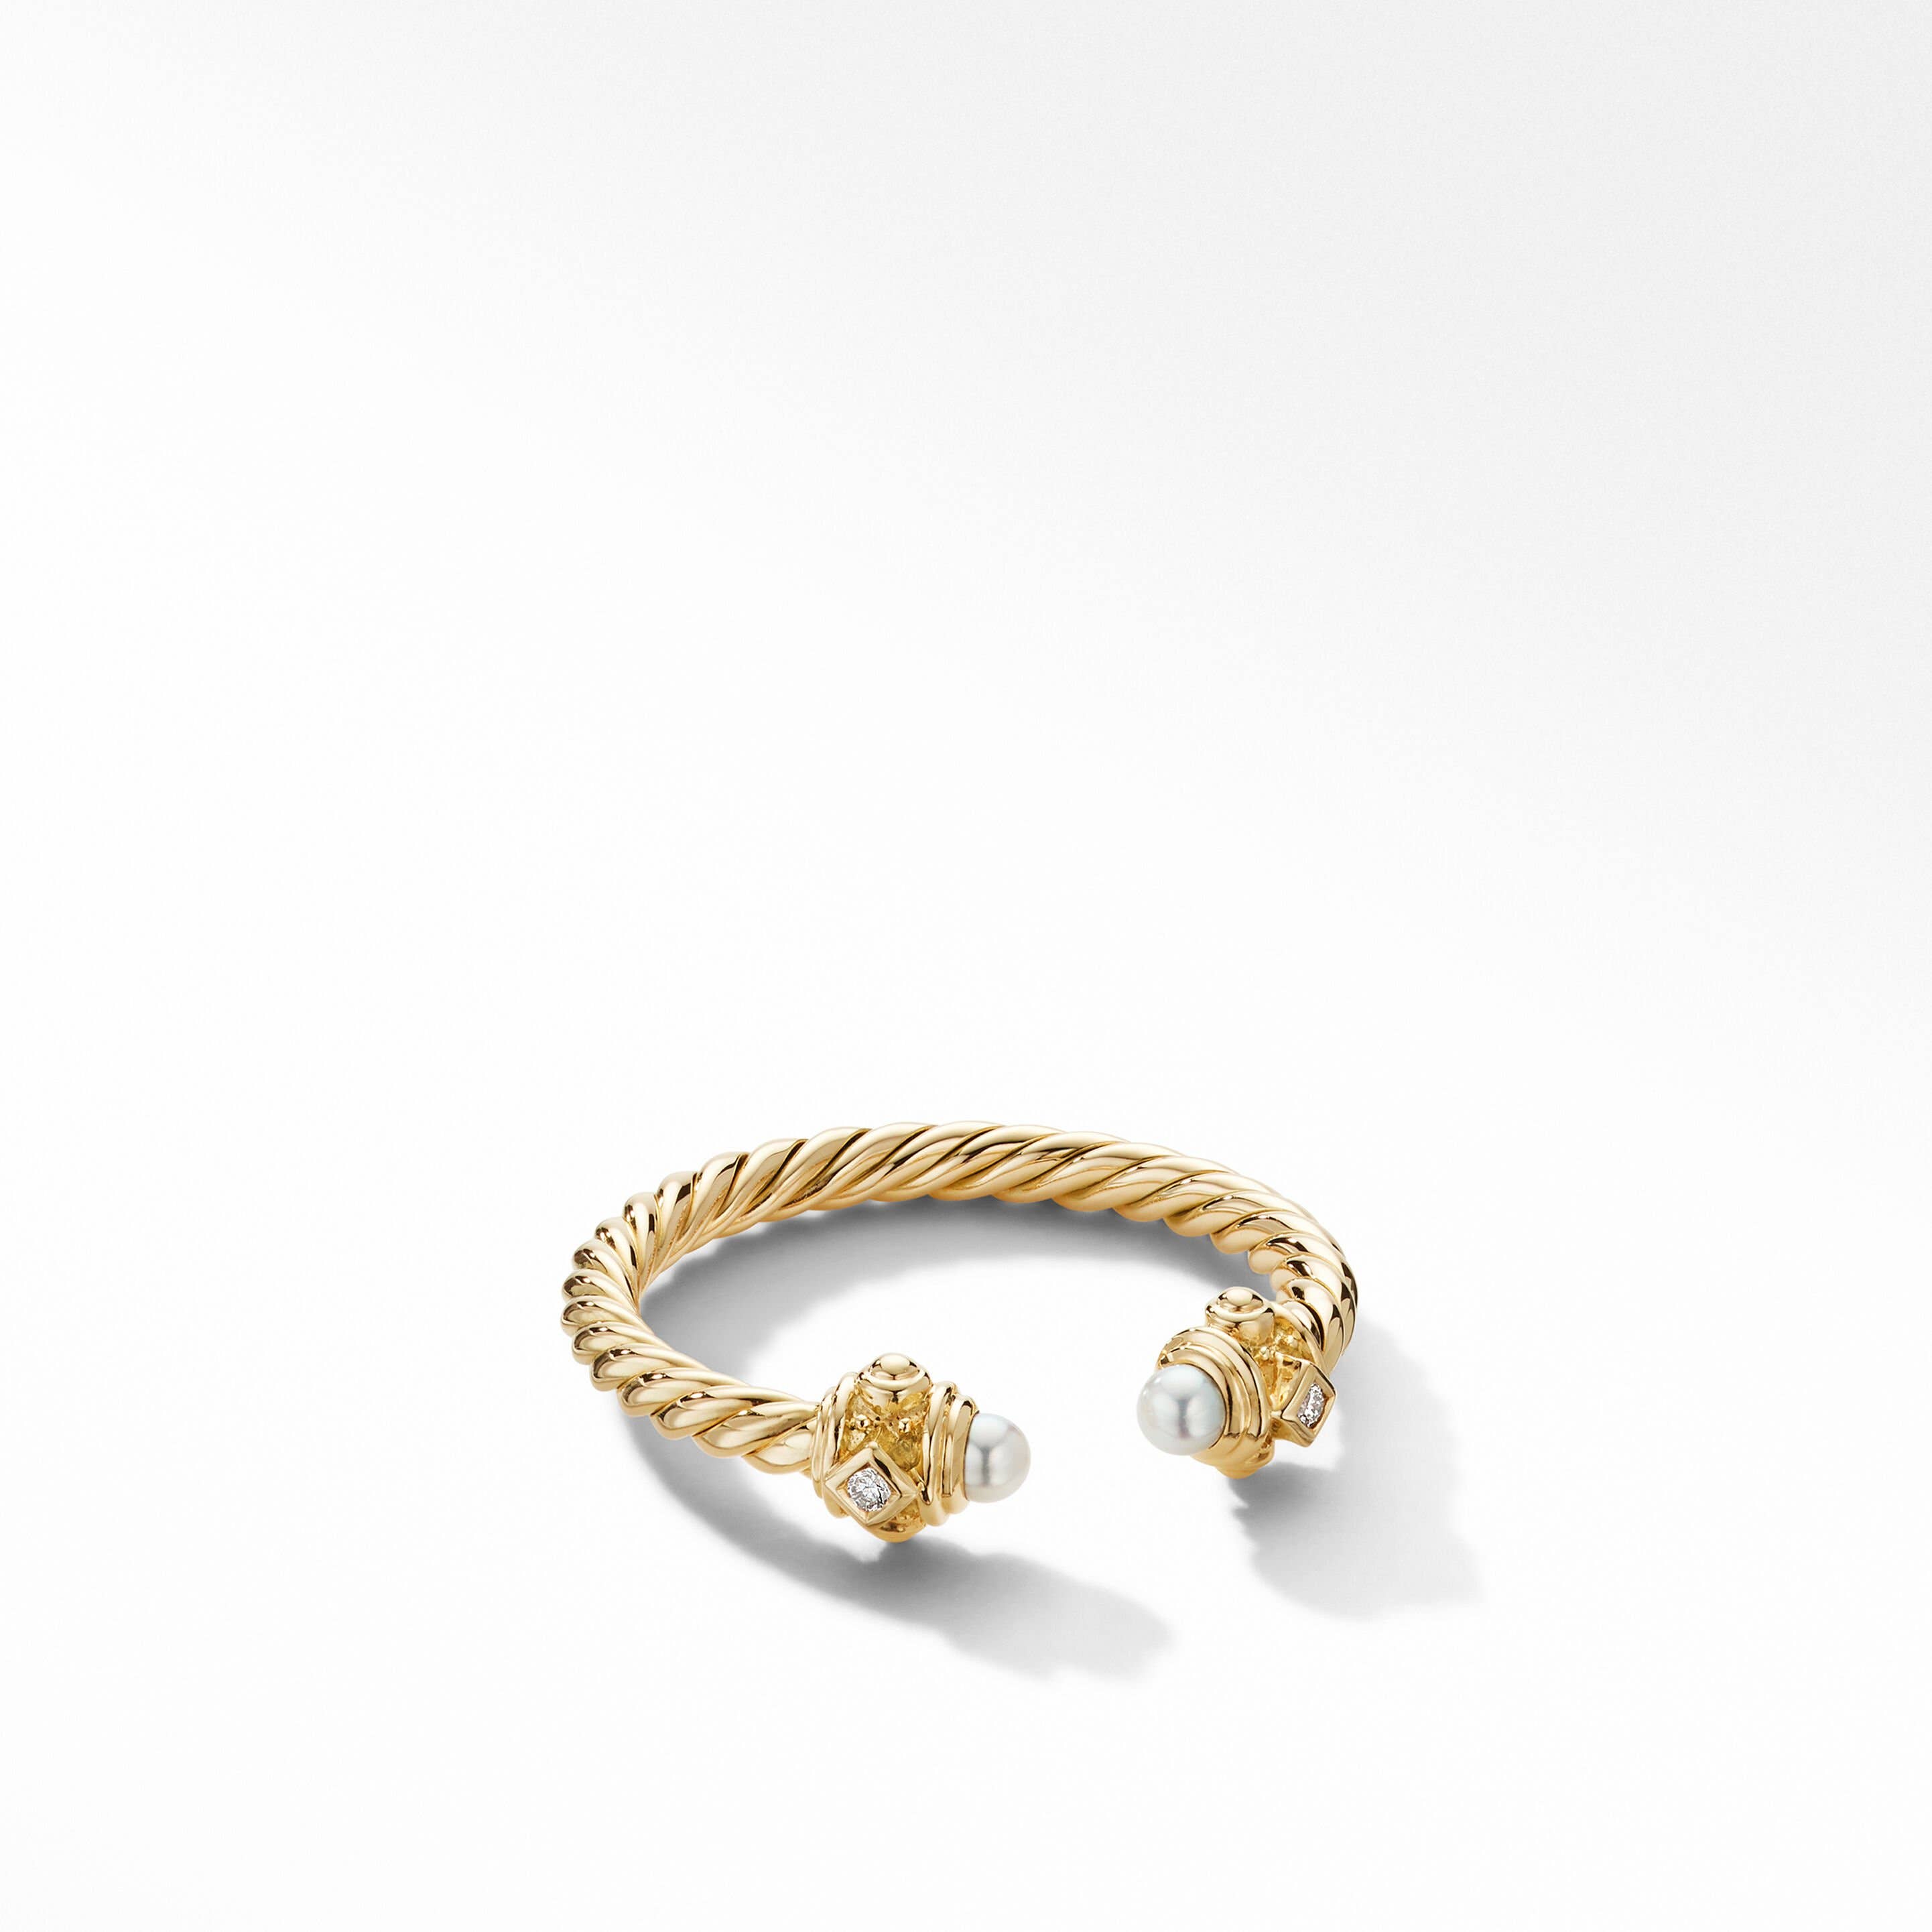 Renaissance Color Ring in 18K Yellow Gold with Pearls and Diamonds